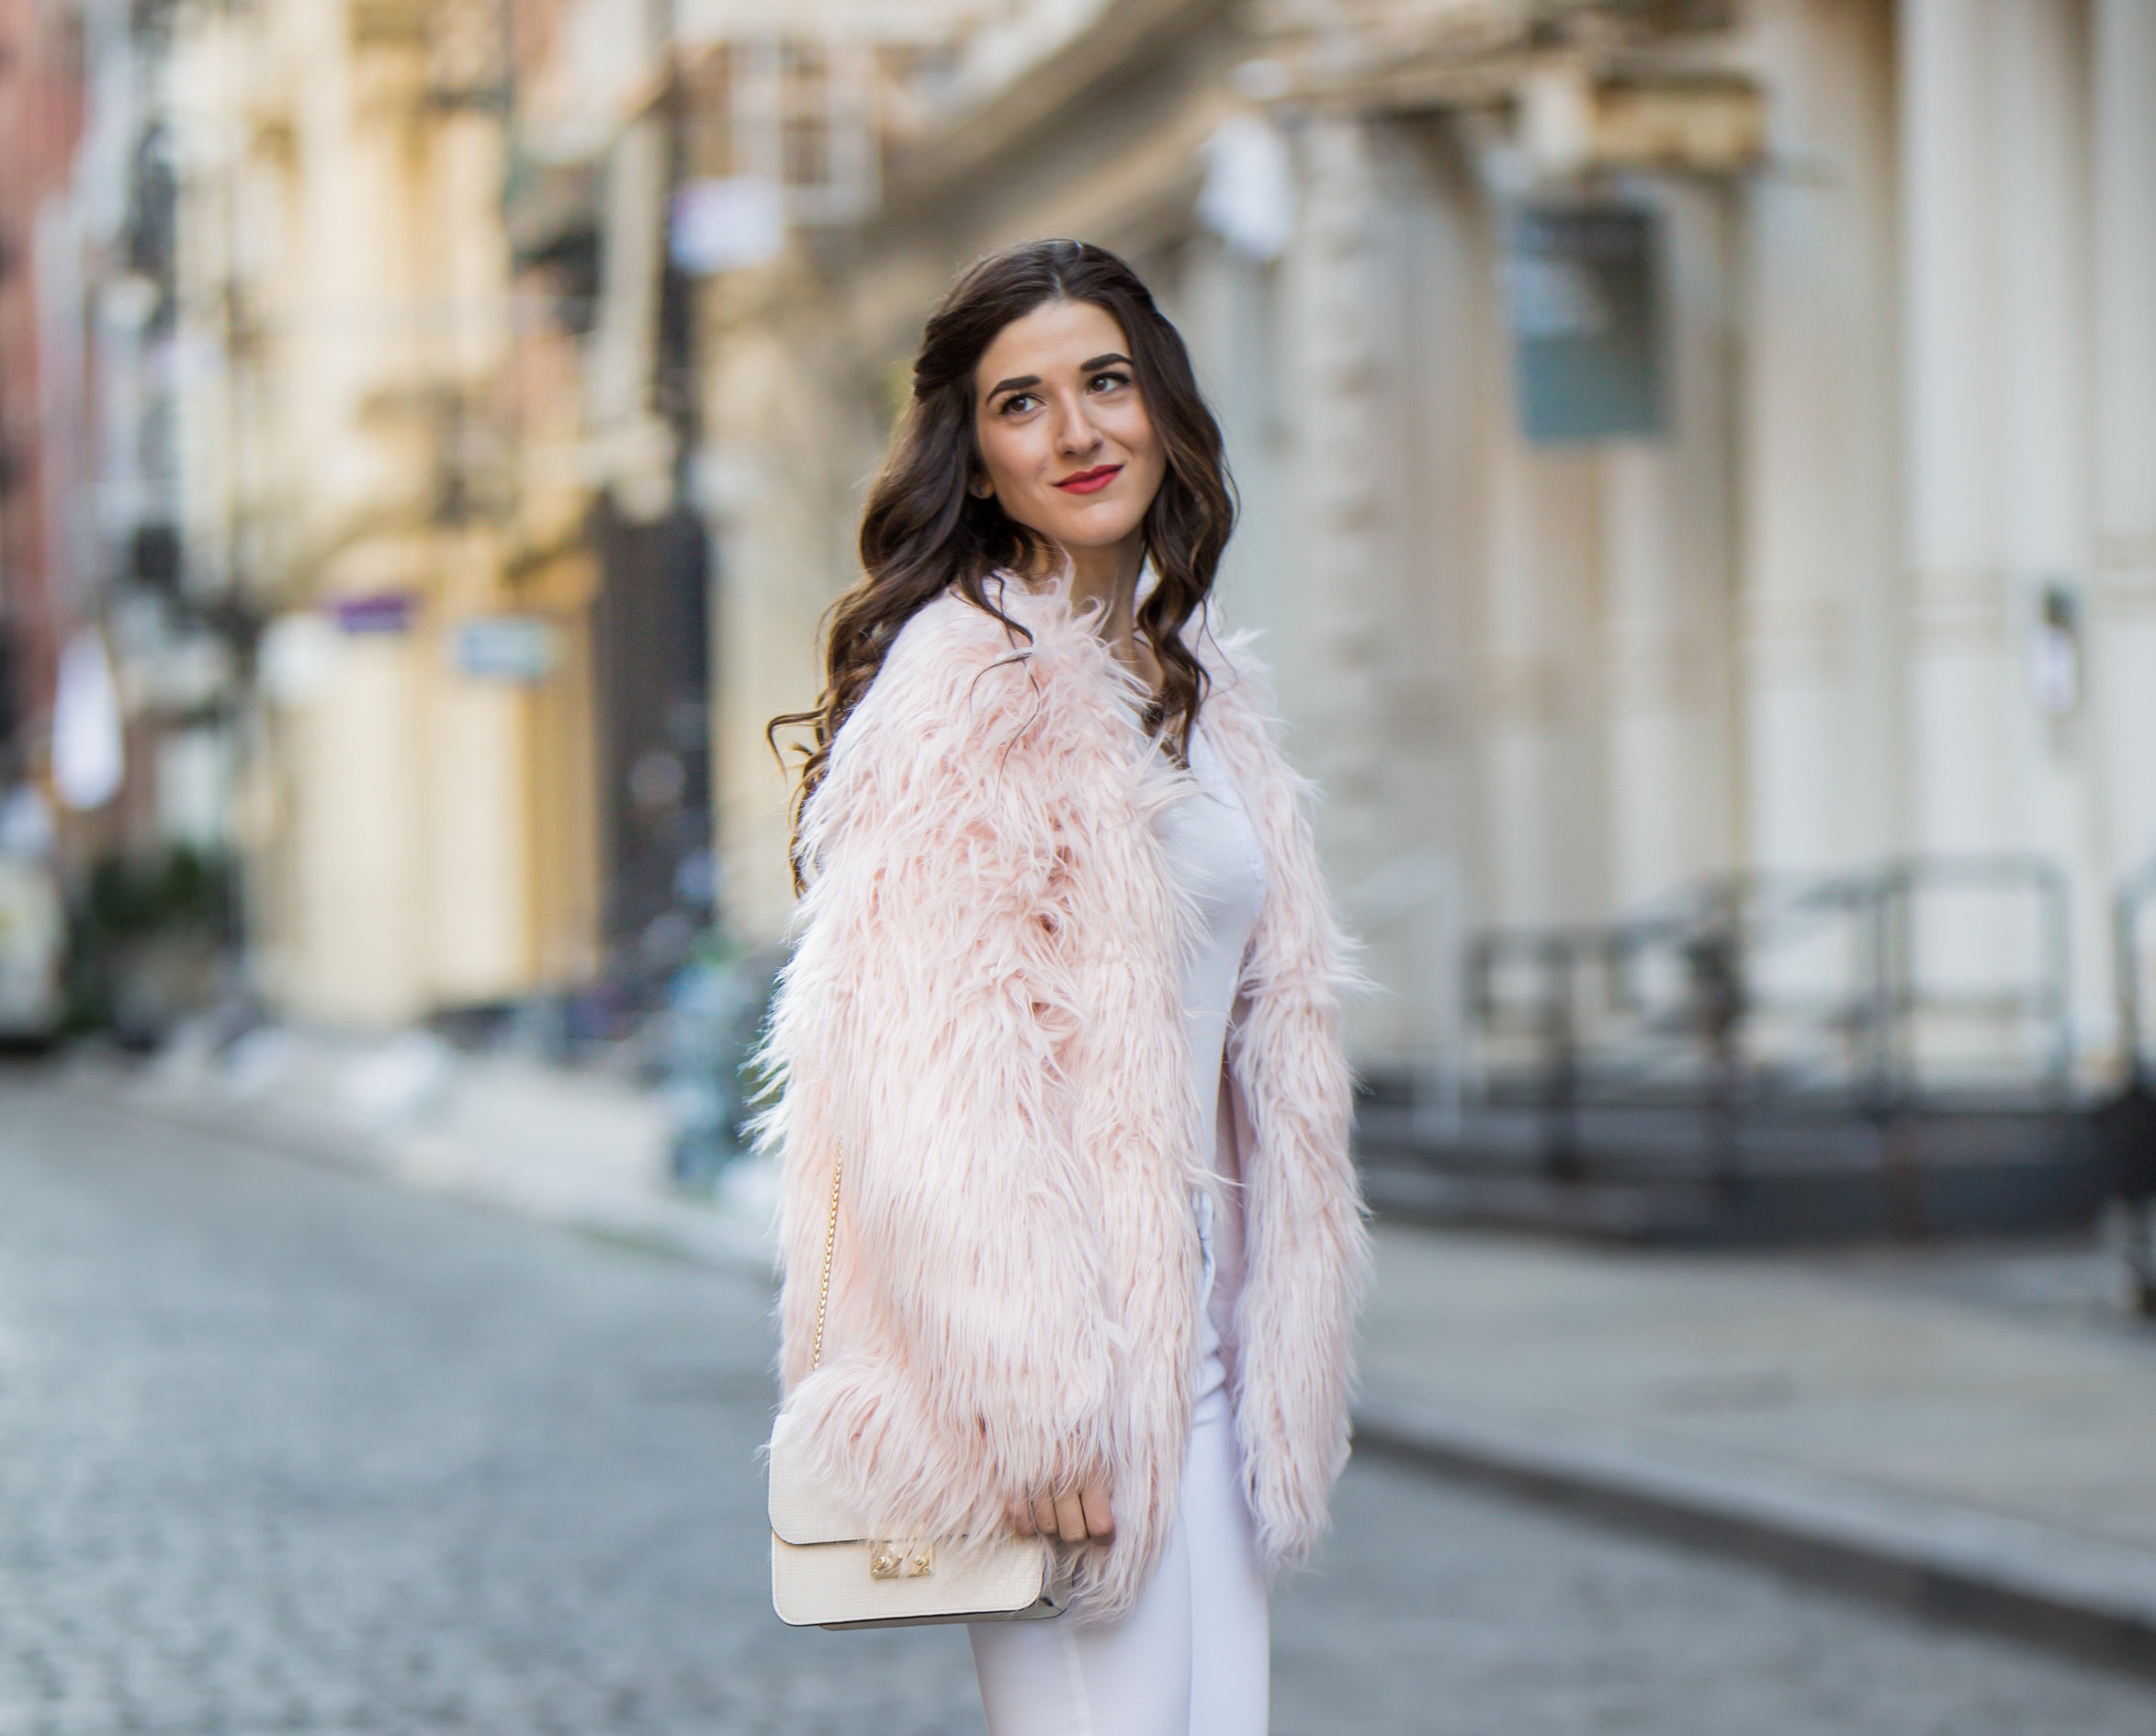 Pink Faux Fur Jacket White Jeans The Best Career Advice Esther Santer Fashion Blog NYC Street Style Blogger Outfit OOTD Trendy Winter Whites Henri Bendel Bag Tan Booties Accessories Girl Women Shop Sale Hair Model Shoes What To Wear Wearing Photoshoot.jpg